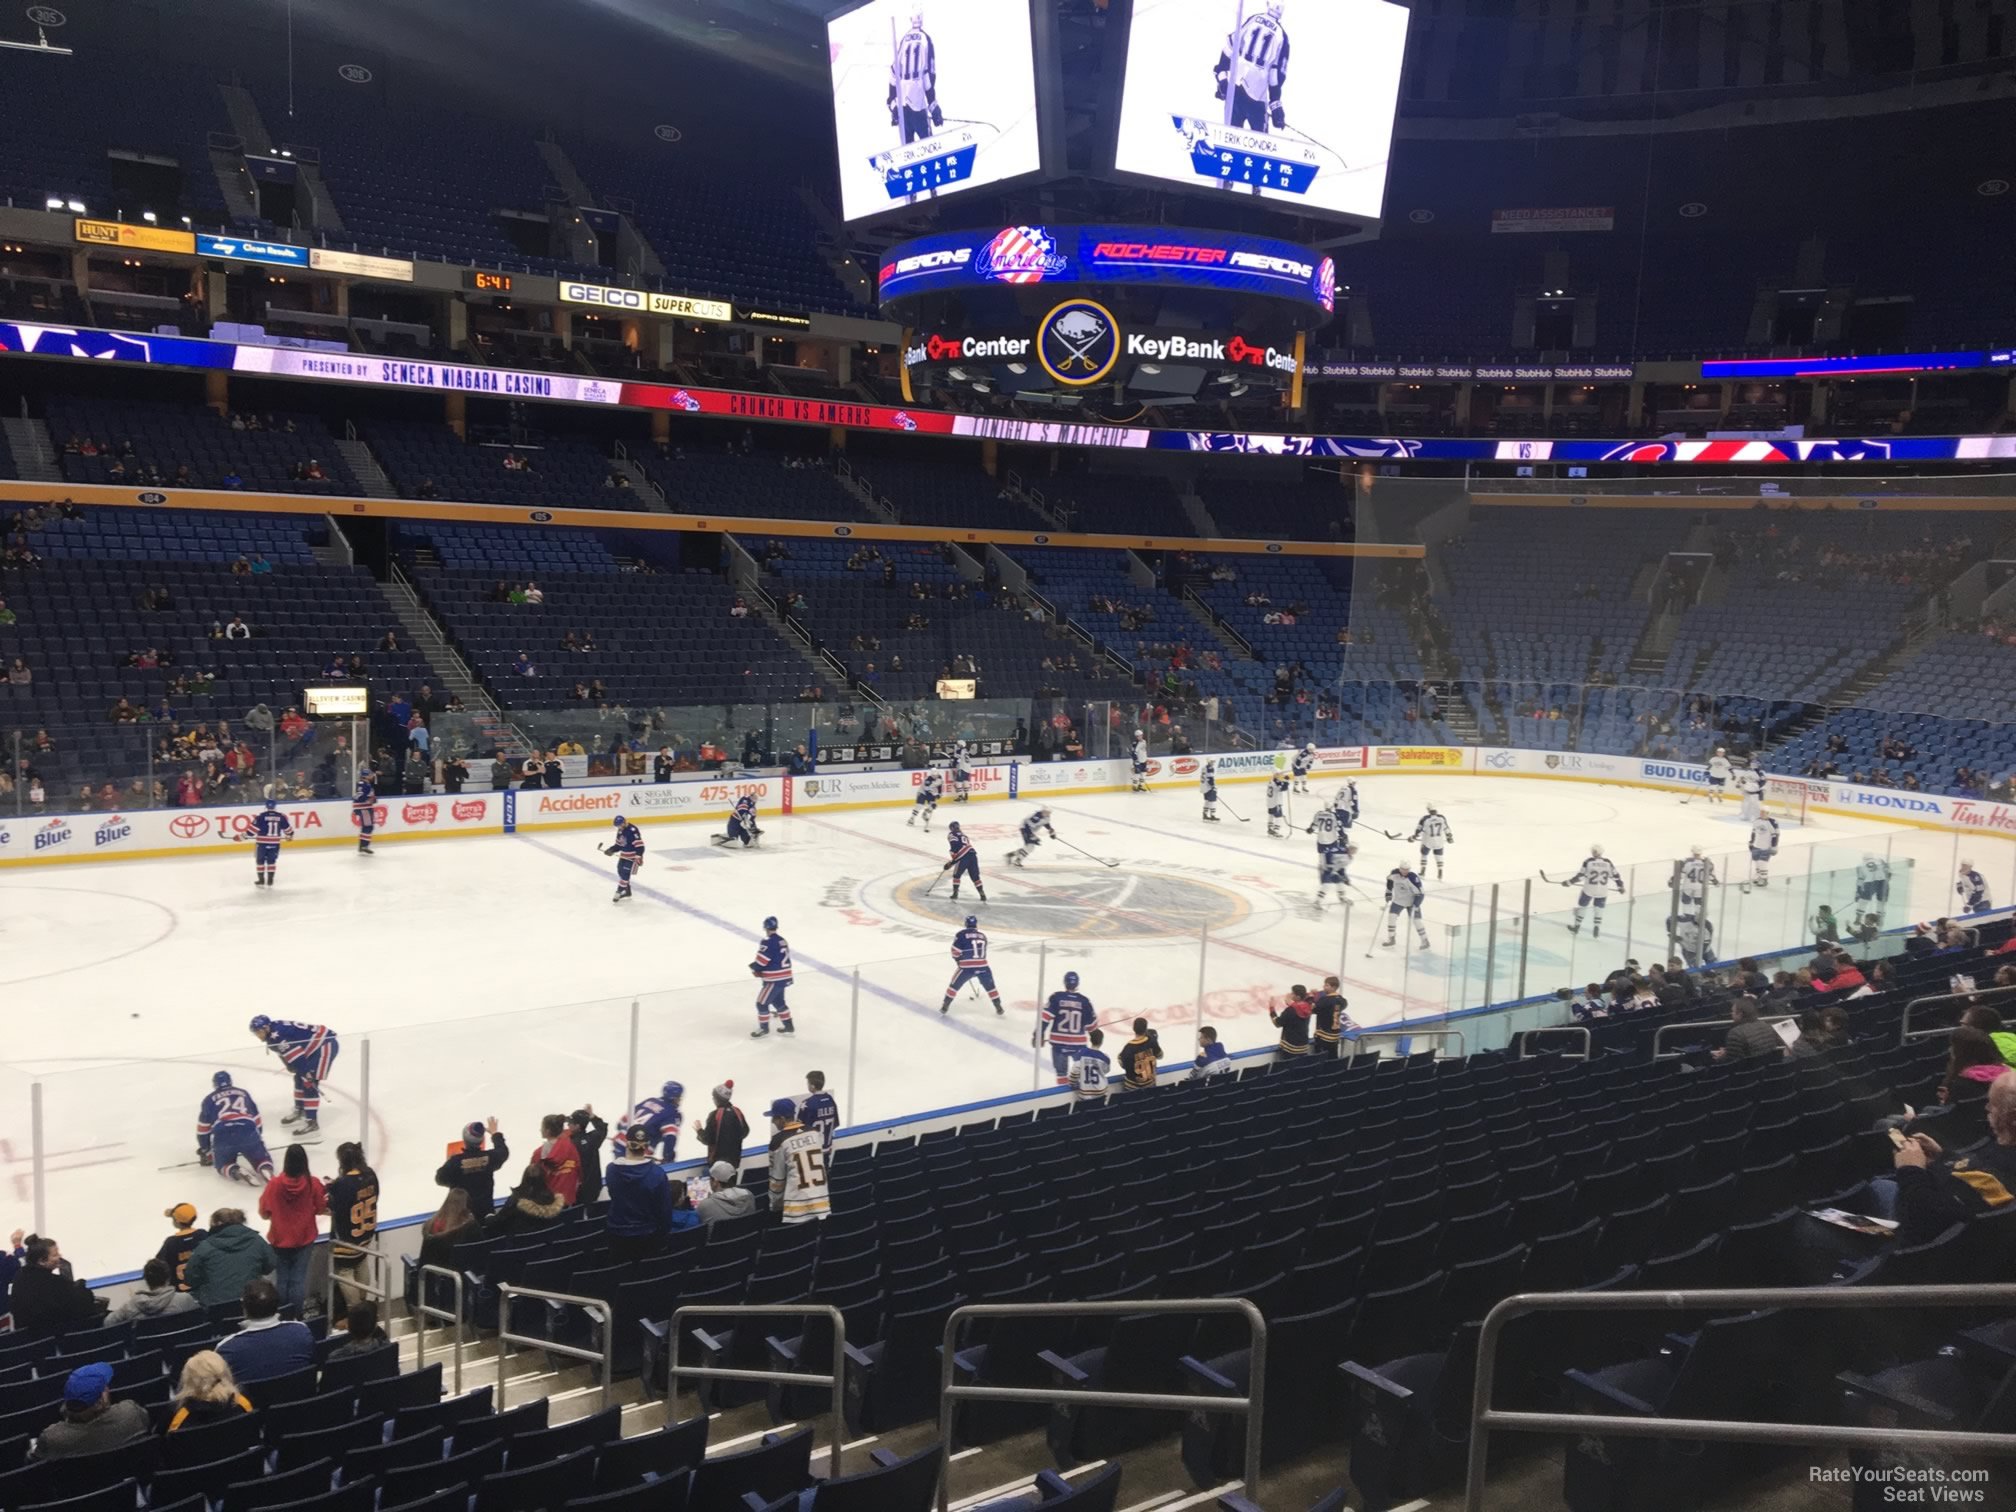 section 119, row 22 seat view  for hockey - keybank center